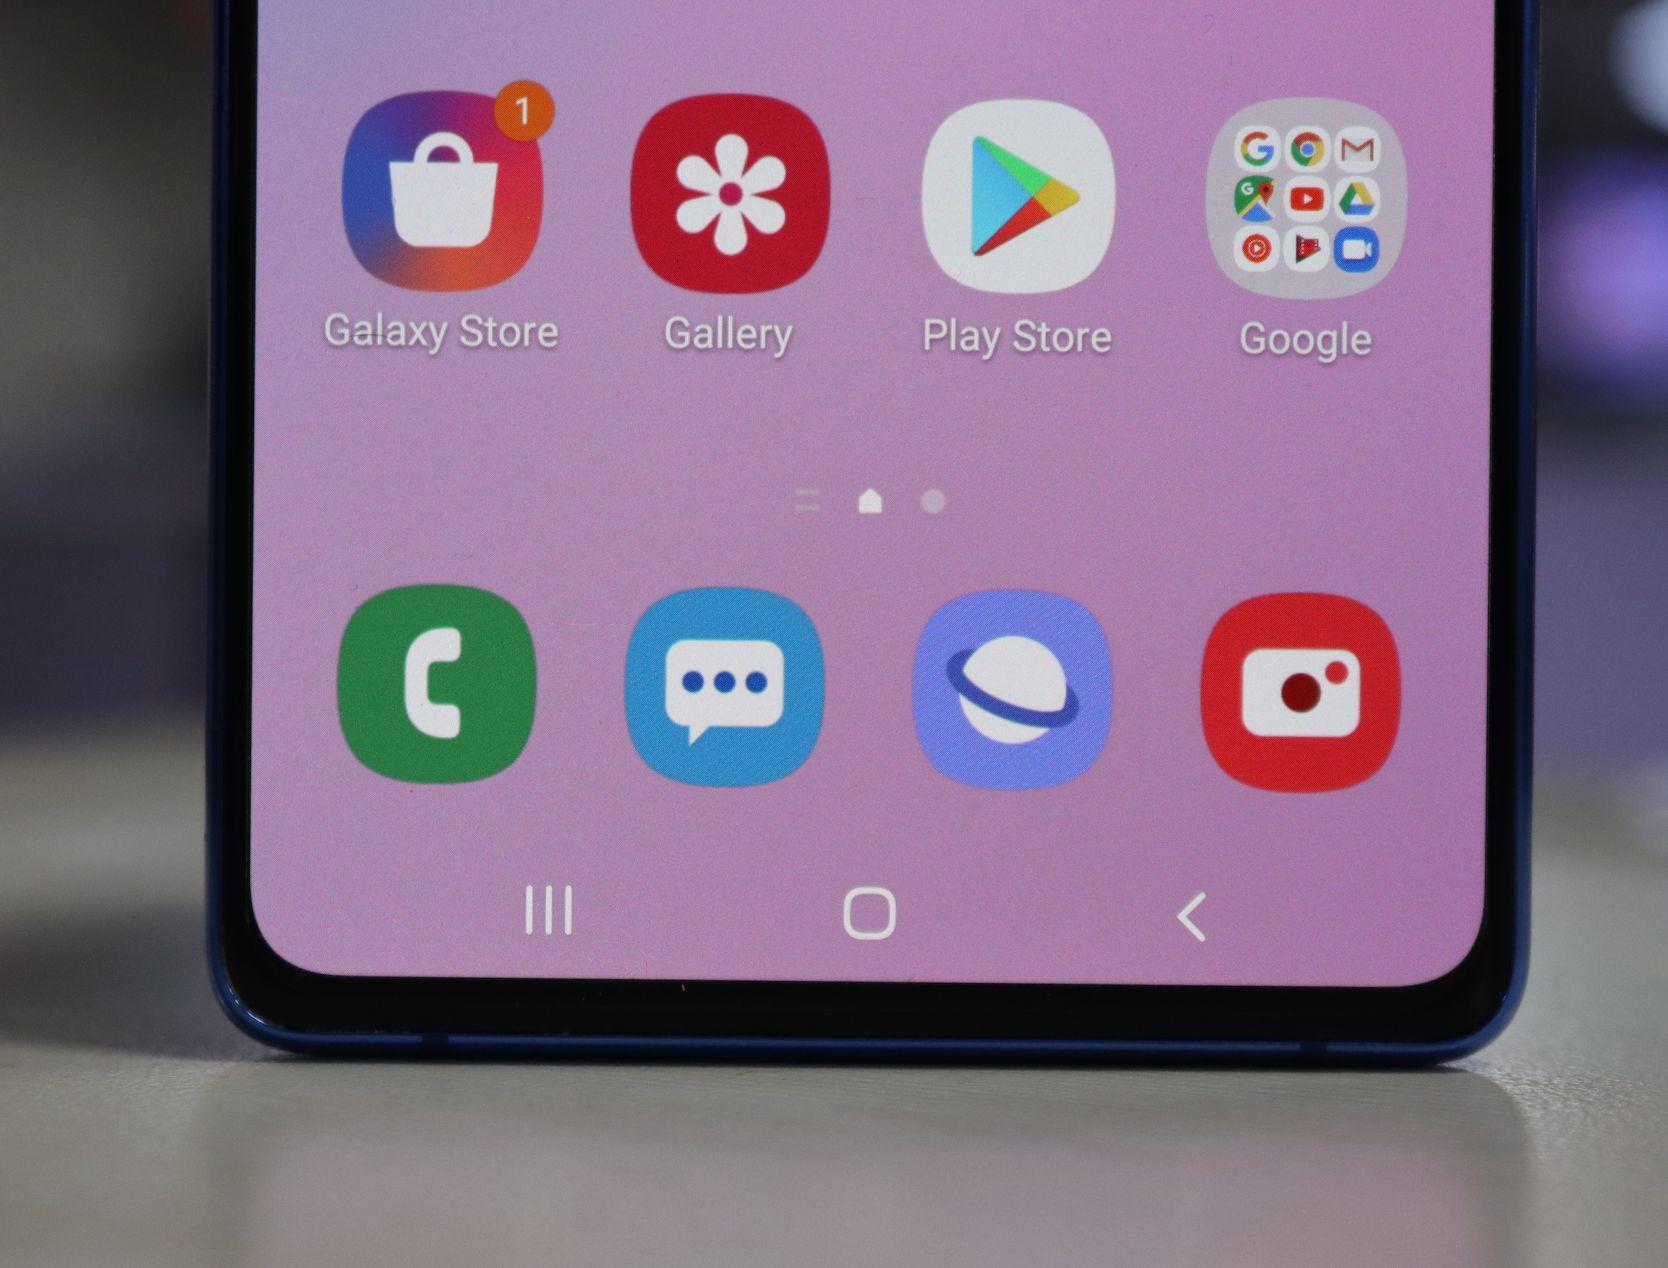 Samsung Galaxy S10 Lite flaunts a sturdy build quality and features an all glass body